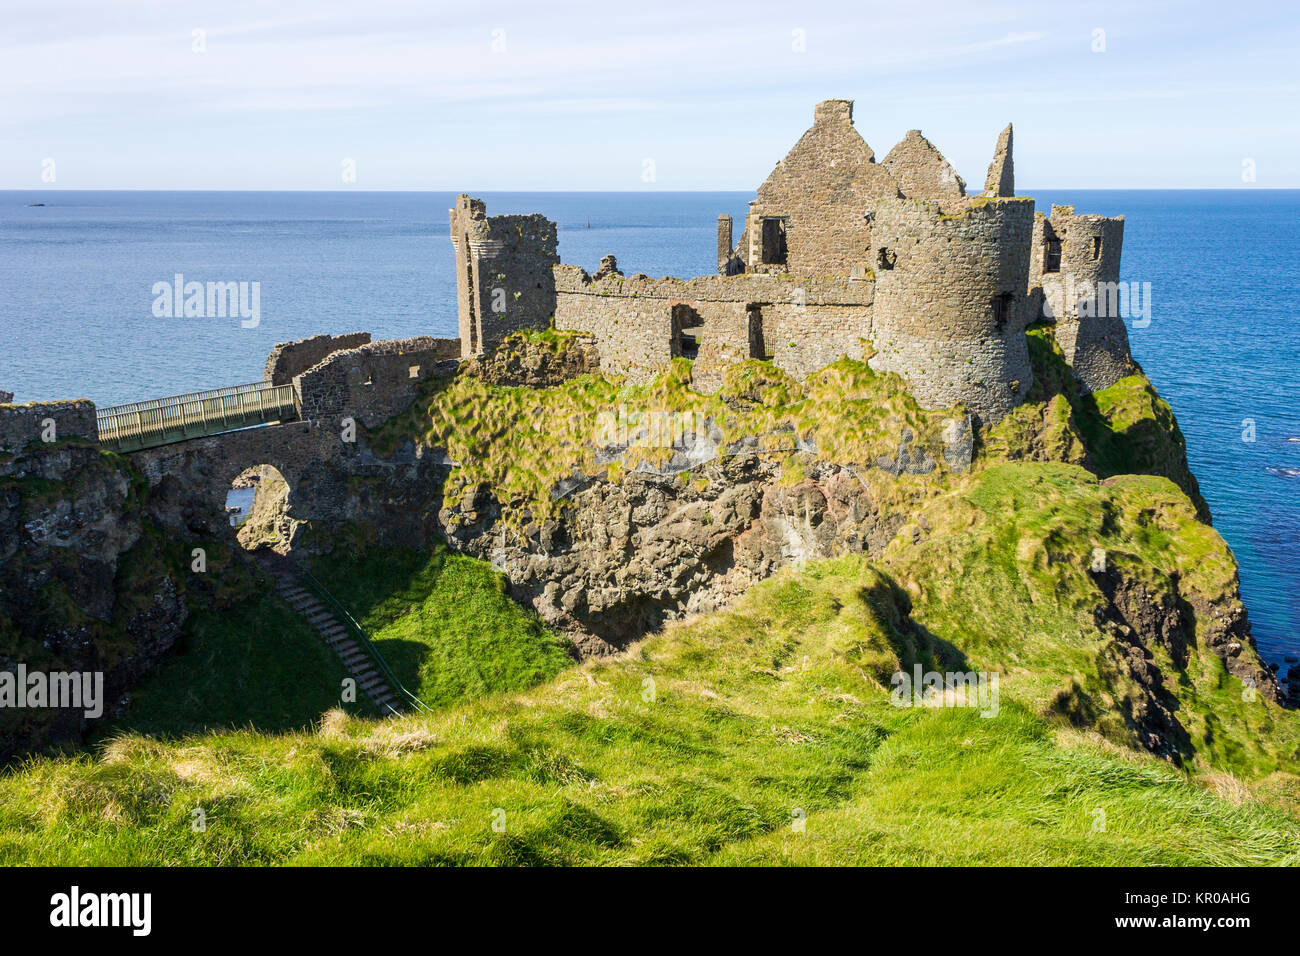 Dunluce Castle (Irish: Dun Libhse), a now-ruined medieval castle located on the edge of a basalt outcropping in County Antrim, Northern Ireland Stock Photo